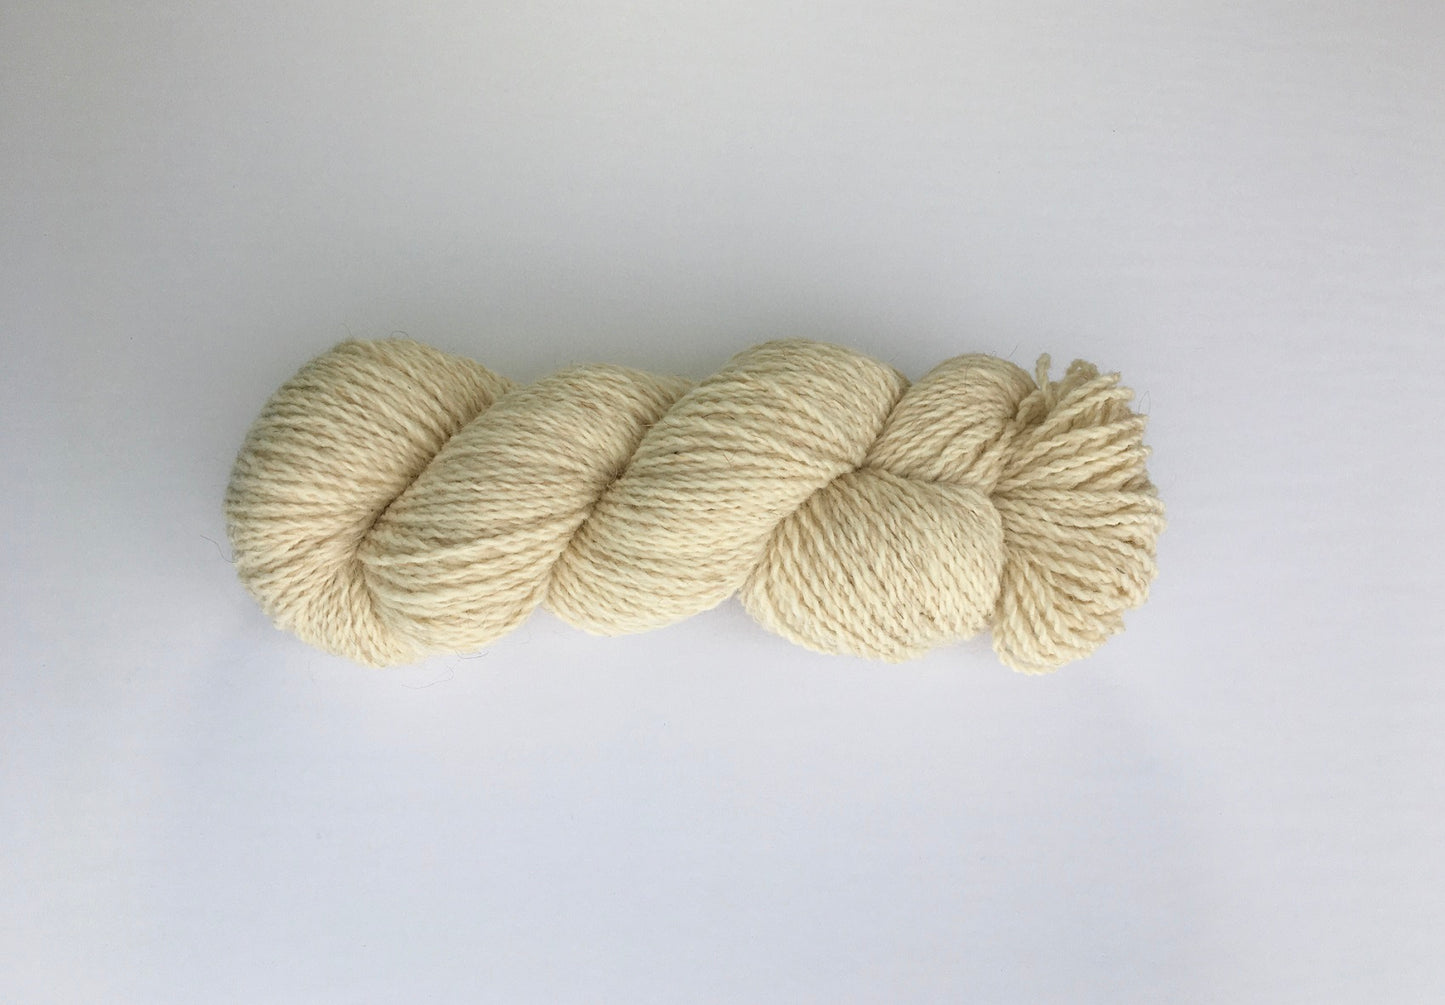 One hank of creamy white Ramo Worsted weight yarn with just a hint of red